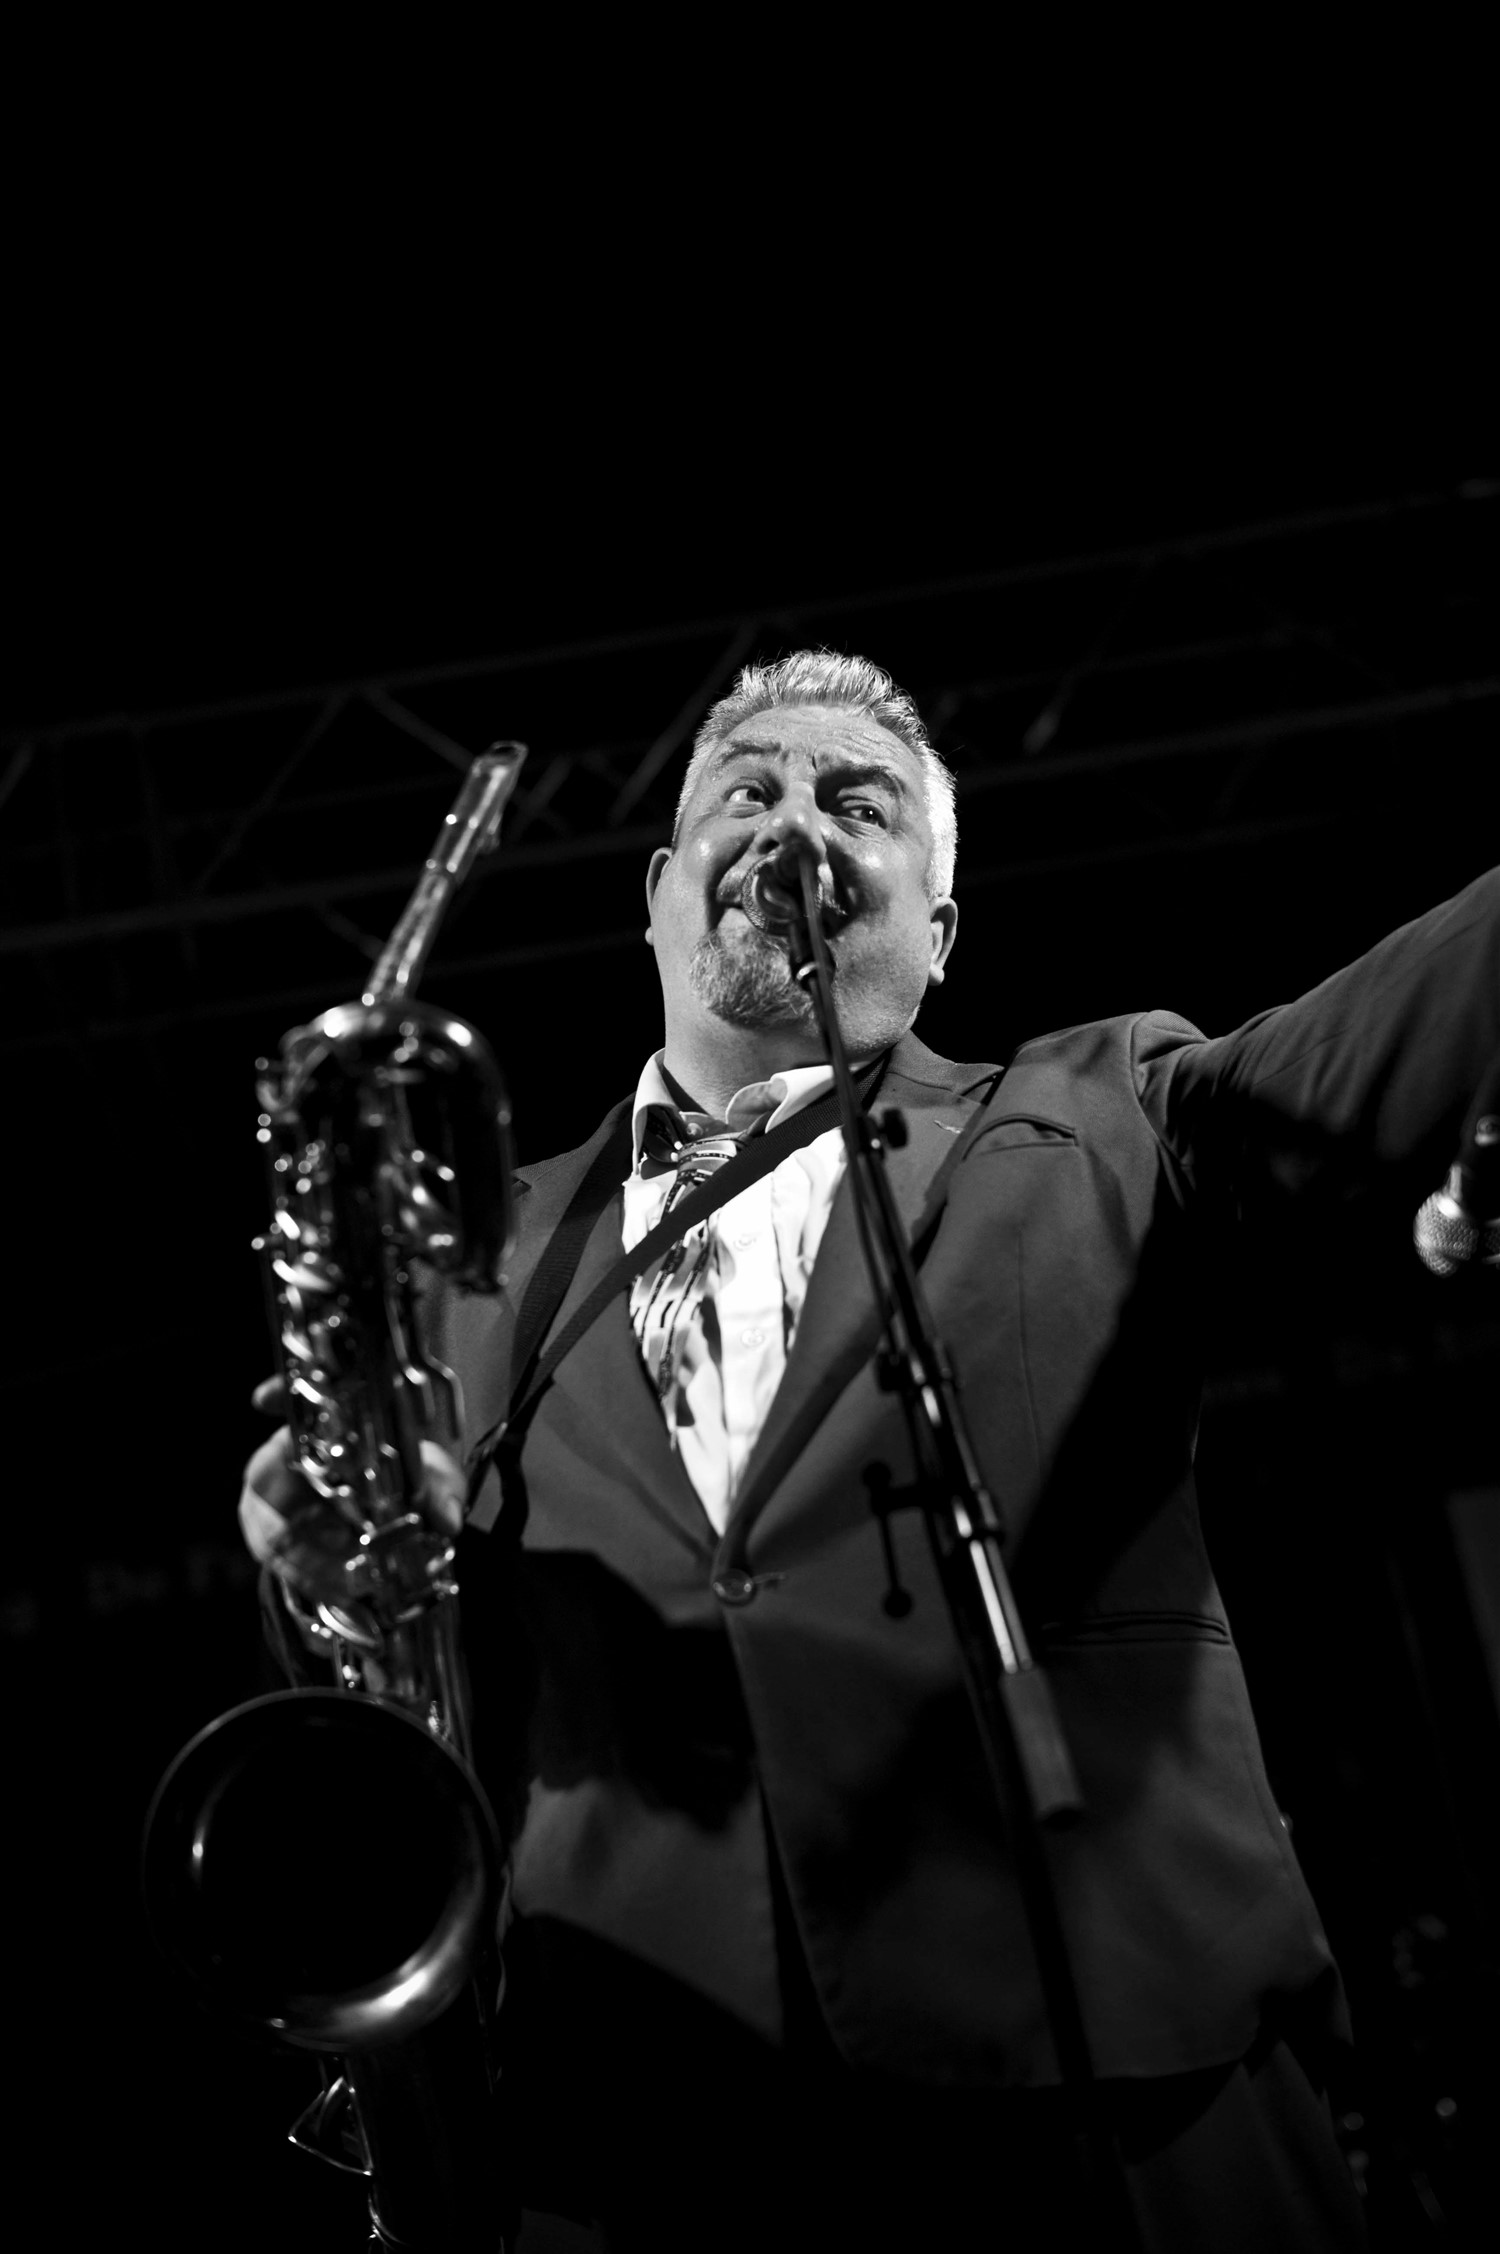 King Pleasure and the Biscuit Boys Part of Birmingham Jazz and Blues Festival on jul. 26, 19:30@Sutton Coldfield Town Hall - Elegir asientoCompra entradas y obtén información enSutton Coldfield Town Hall 